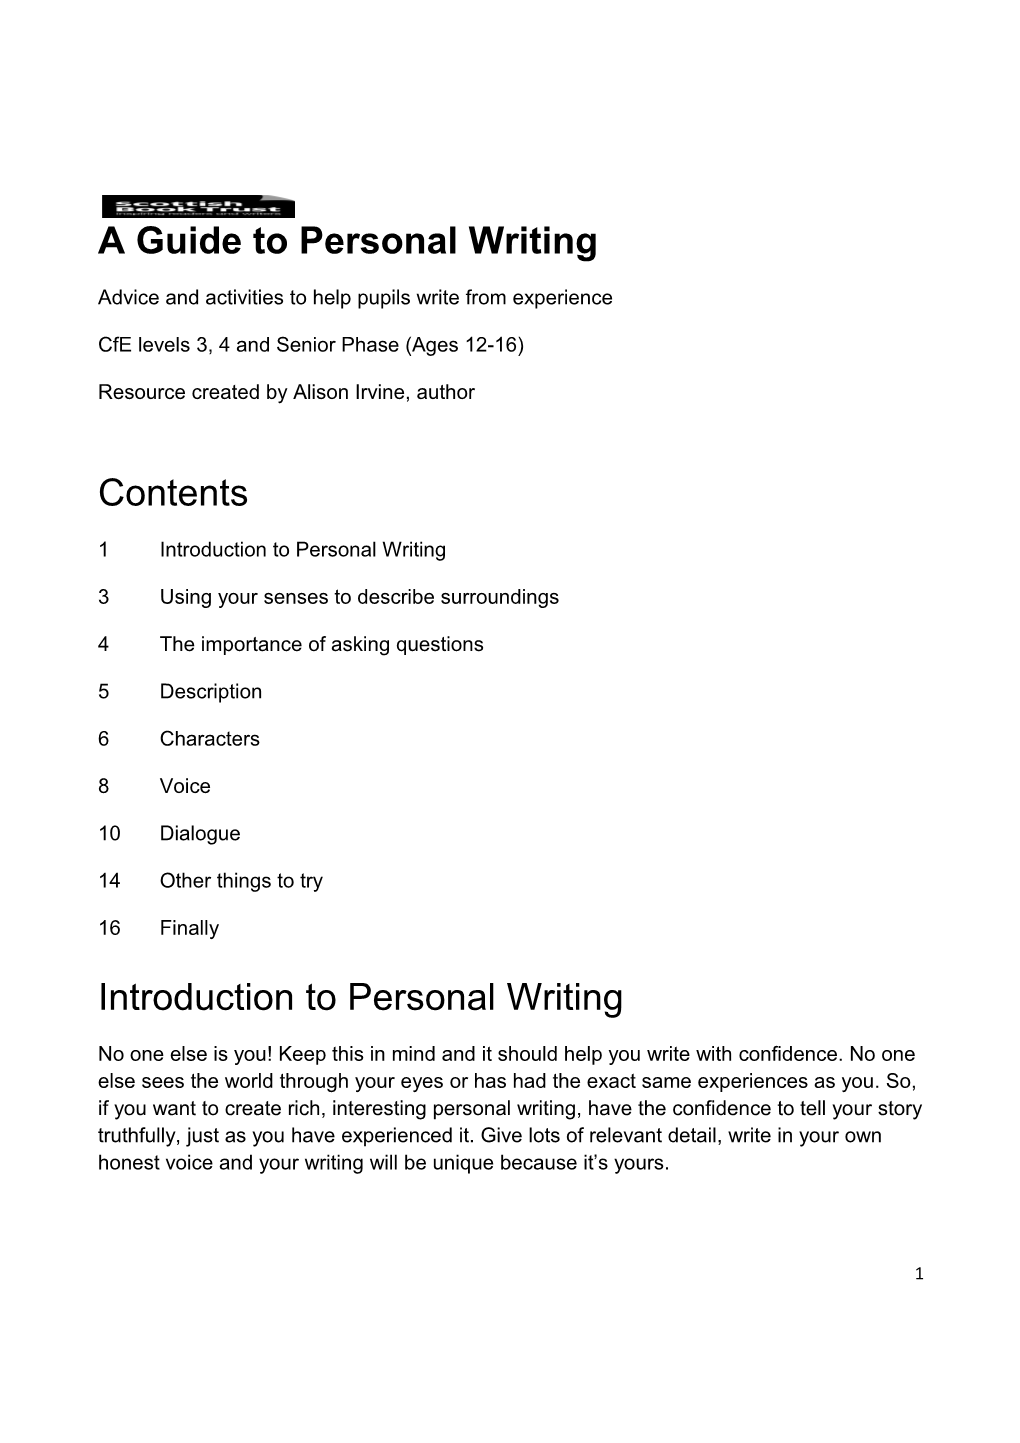 Advice and Activities to Help Pupils Write from Experience